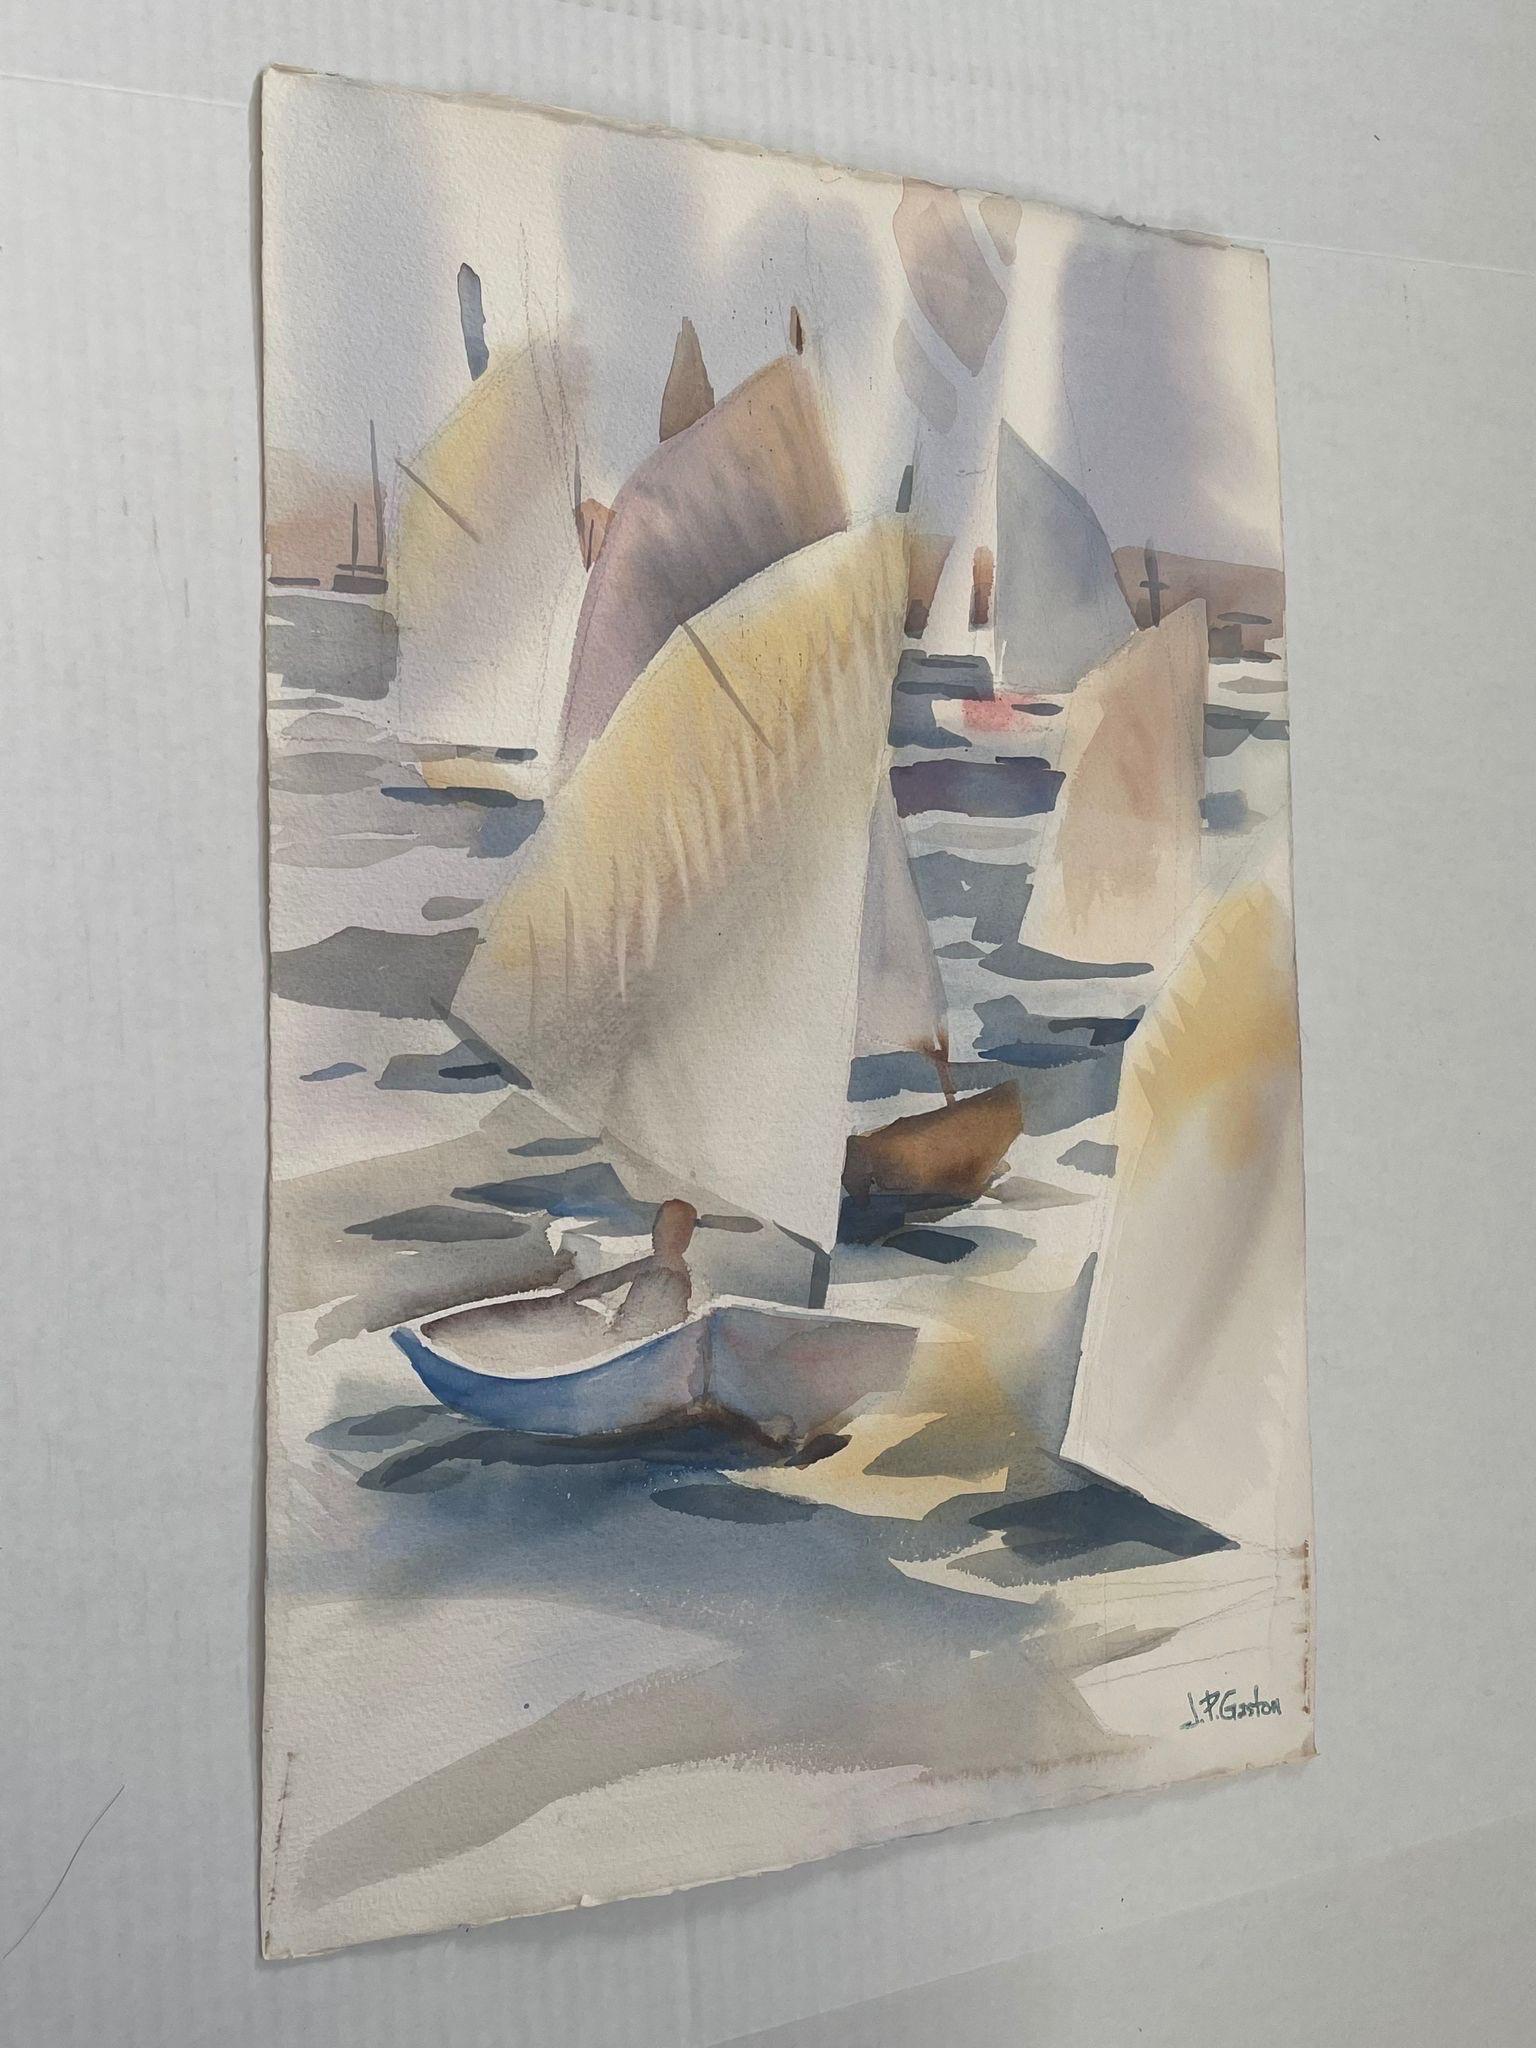 Vintage Art Print of  Abstract Sailing Boats. Possibly Watercolor on Paper.Signed JPGaston as Pictured.

Dimensions. 15 W ; 1/8 D ; 23 H